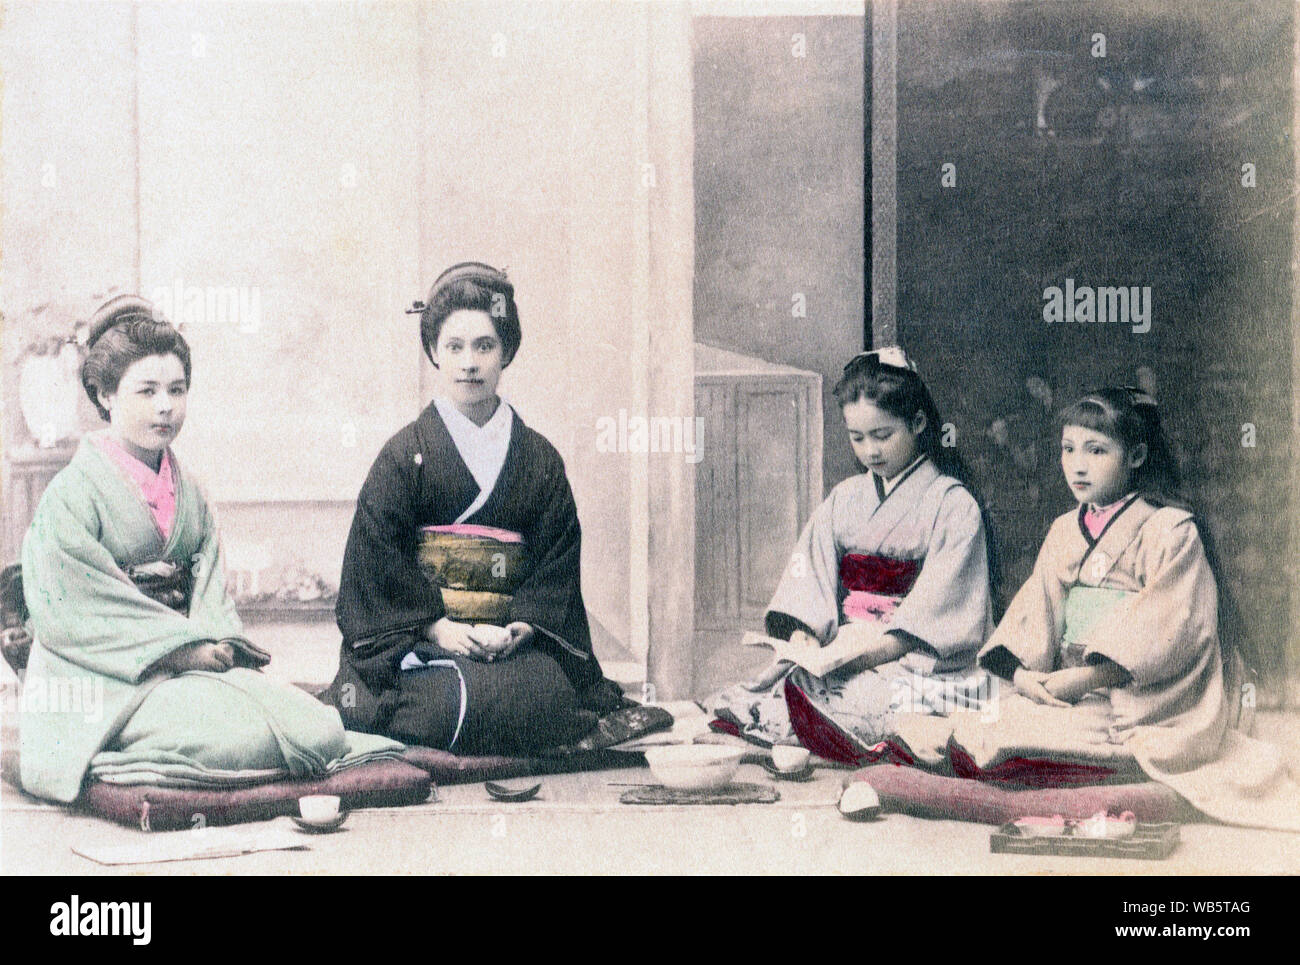 [ 1890s Japan - Westerners in Kimono ] —   A Western family in Japanese costumes. It was very common in the late nineteenth century for Westerners to have themselves photographed wearing Japanese clothing.   Albumen photograph sourced by Kozaburo Tamamura (1856-1923?), 1890s, for 'Japan, Described and Illustrated by the Japanese', Shogun Edition edited by Captain F Brinkley. Published in 1897 by J B Millet Company, Boston Massachusetts, USA.  19th century vintage albumen photograph. Stock Photo